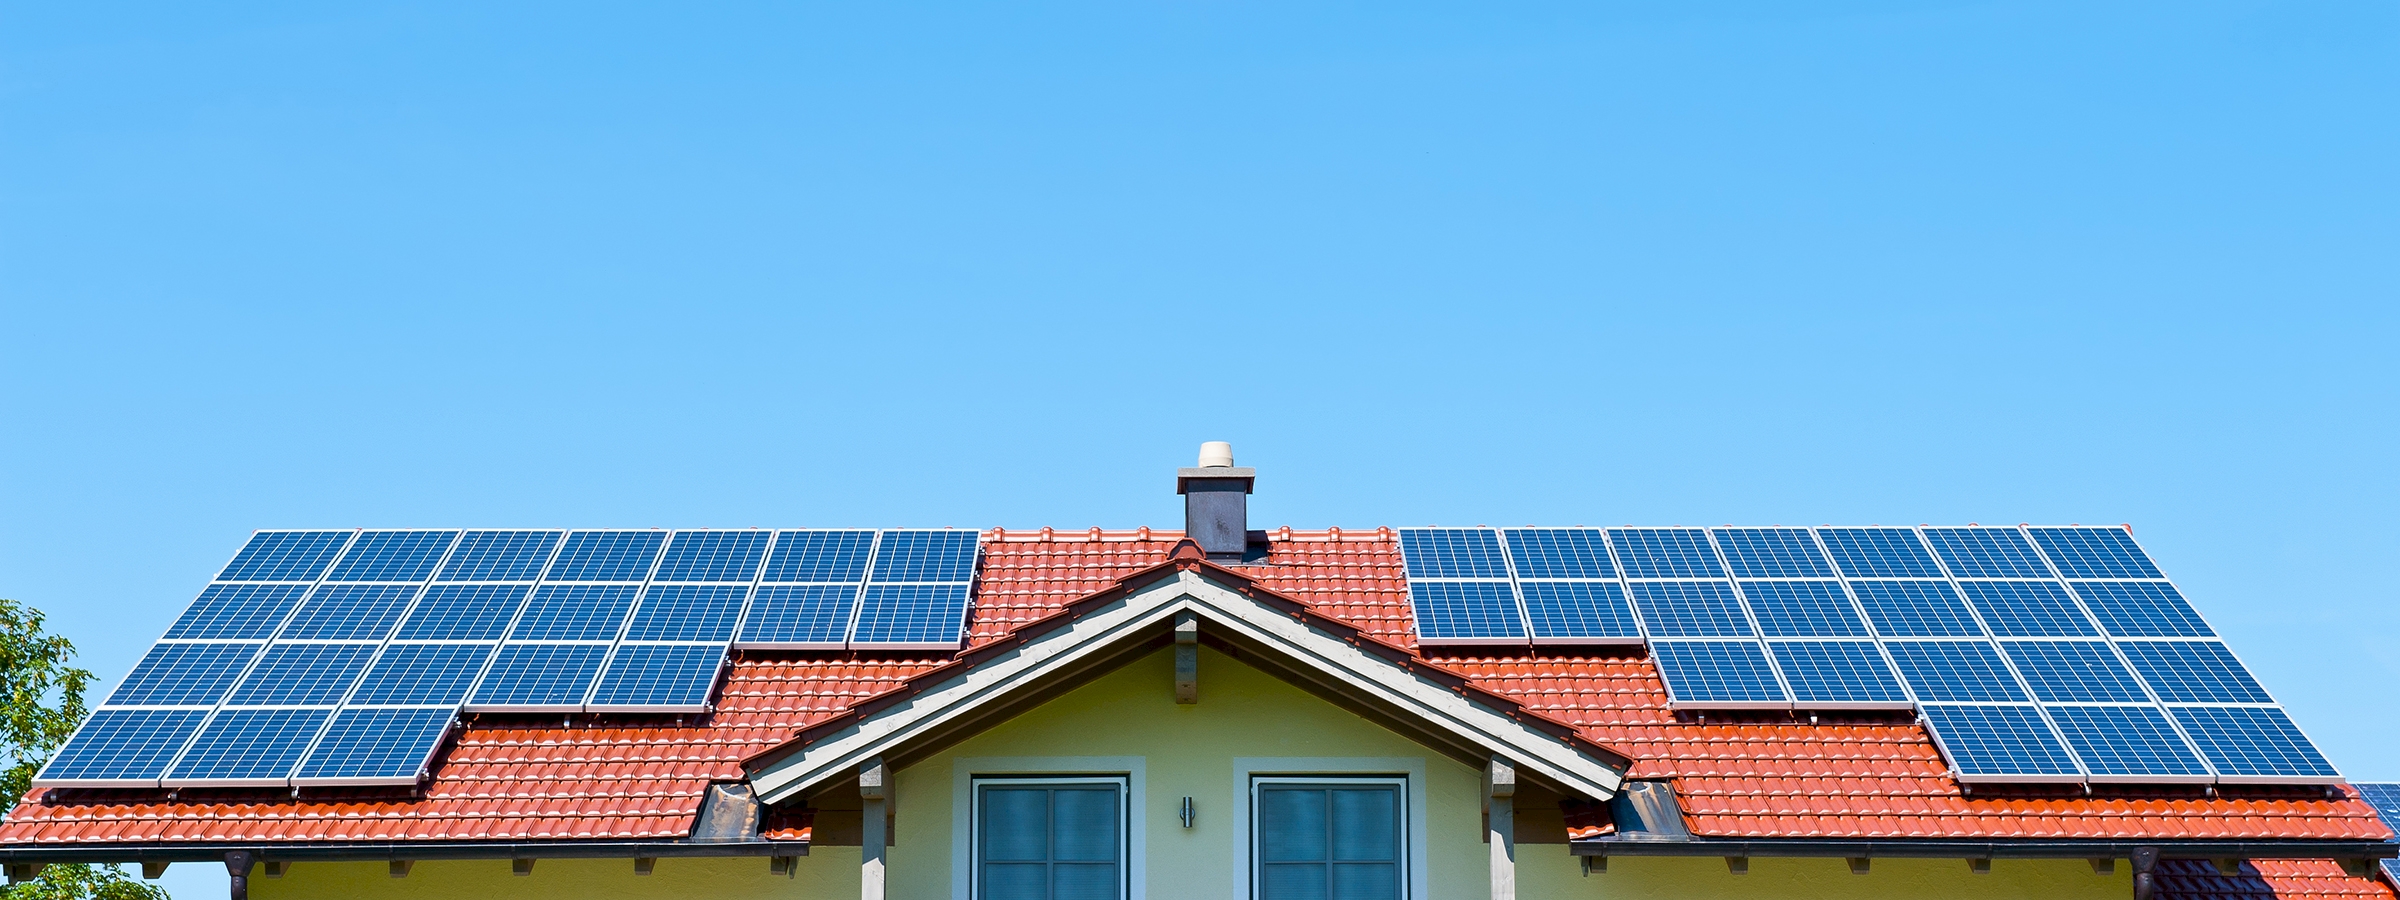 Residential Solar Tax Credits – What You Should Know Before Filing in Massachusetts